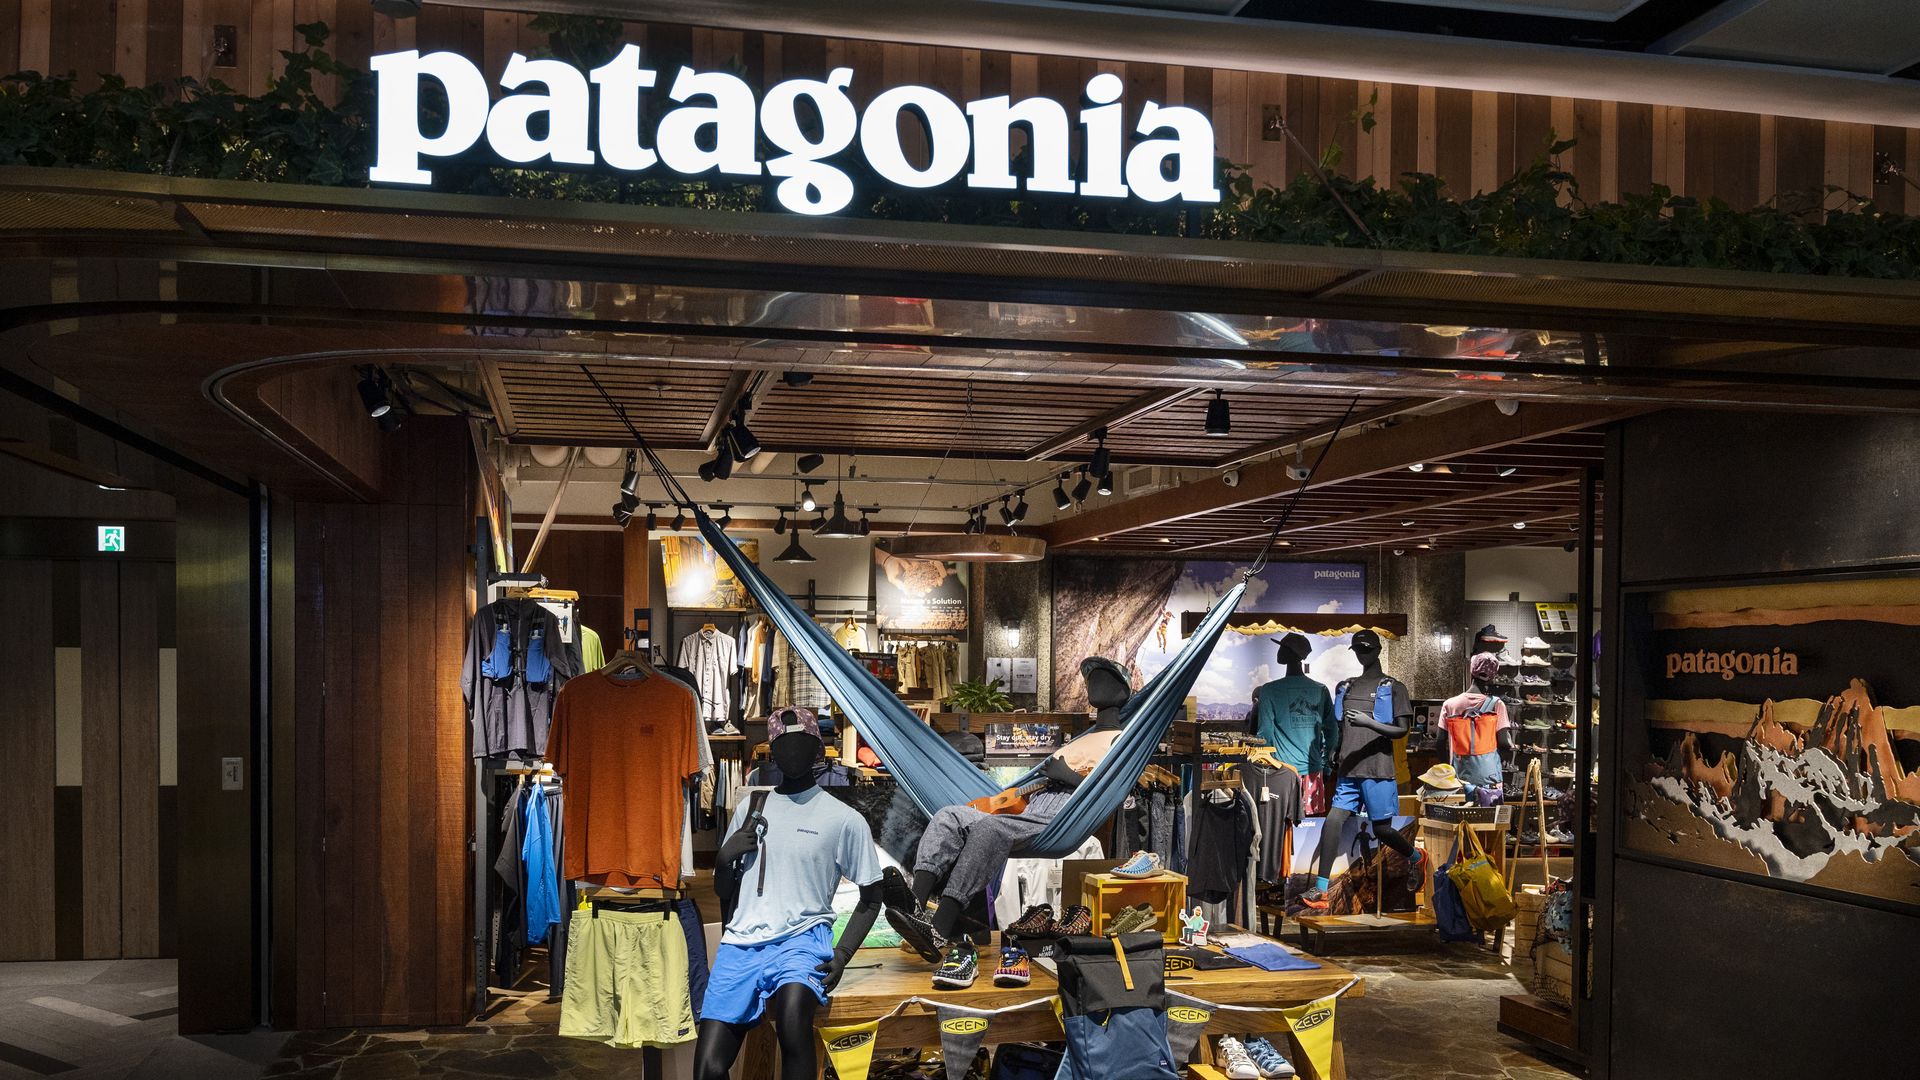 Outdoor clothing brand Patagonia is now owned by an environmental